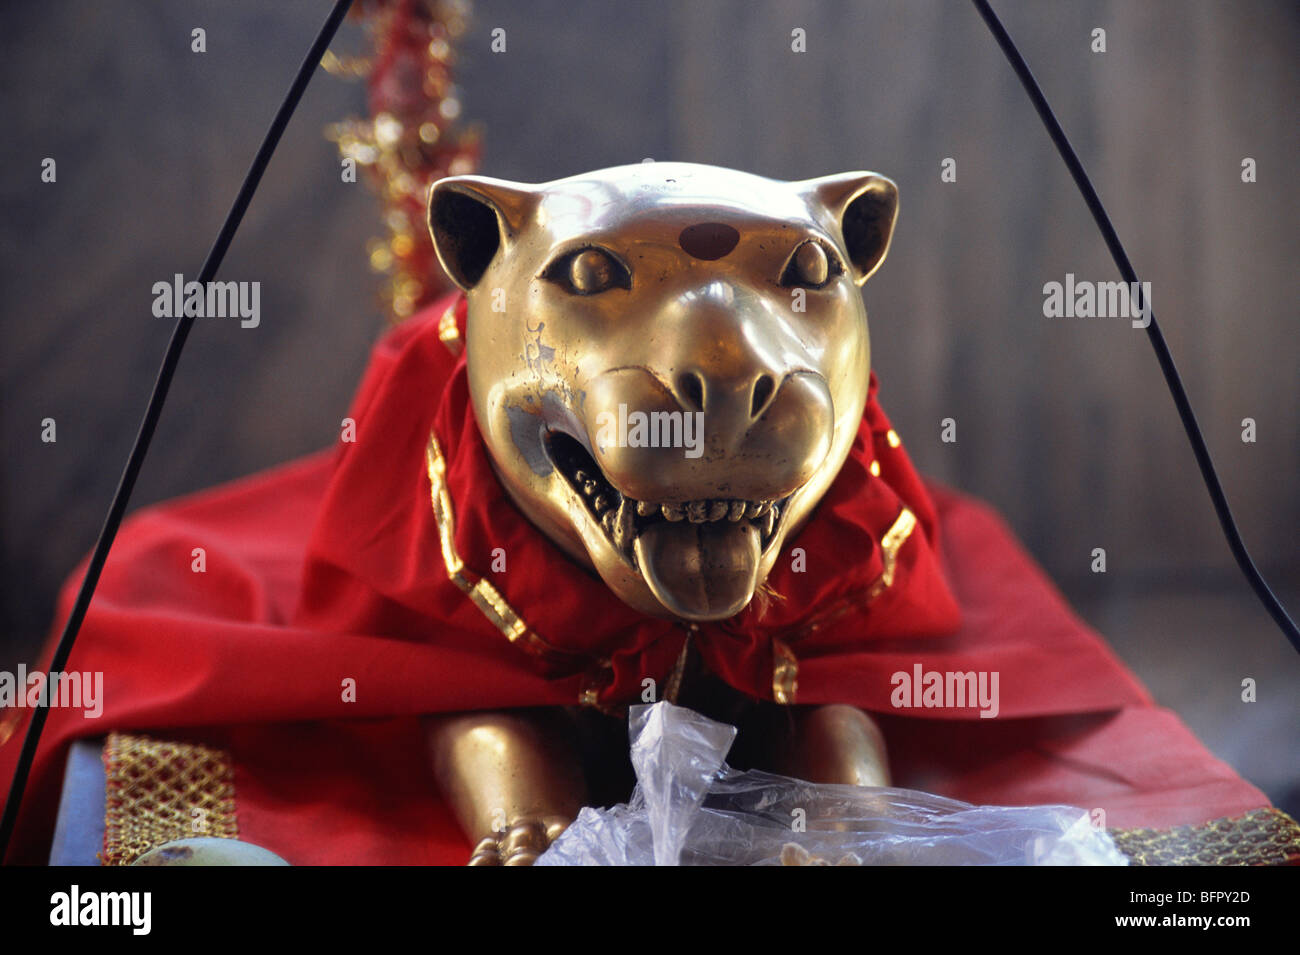 NGS 66768 : Rat statue in Bhale Mata temple ; Himachal Pradesh ; India Stock Photo